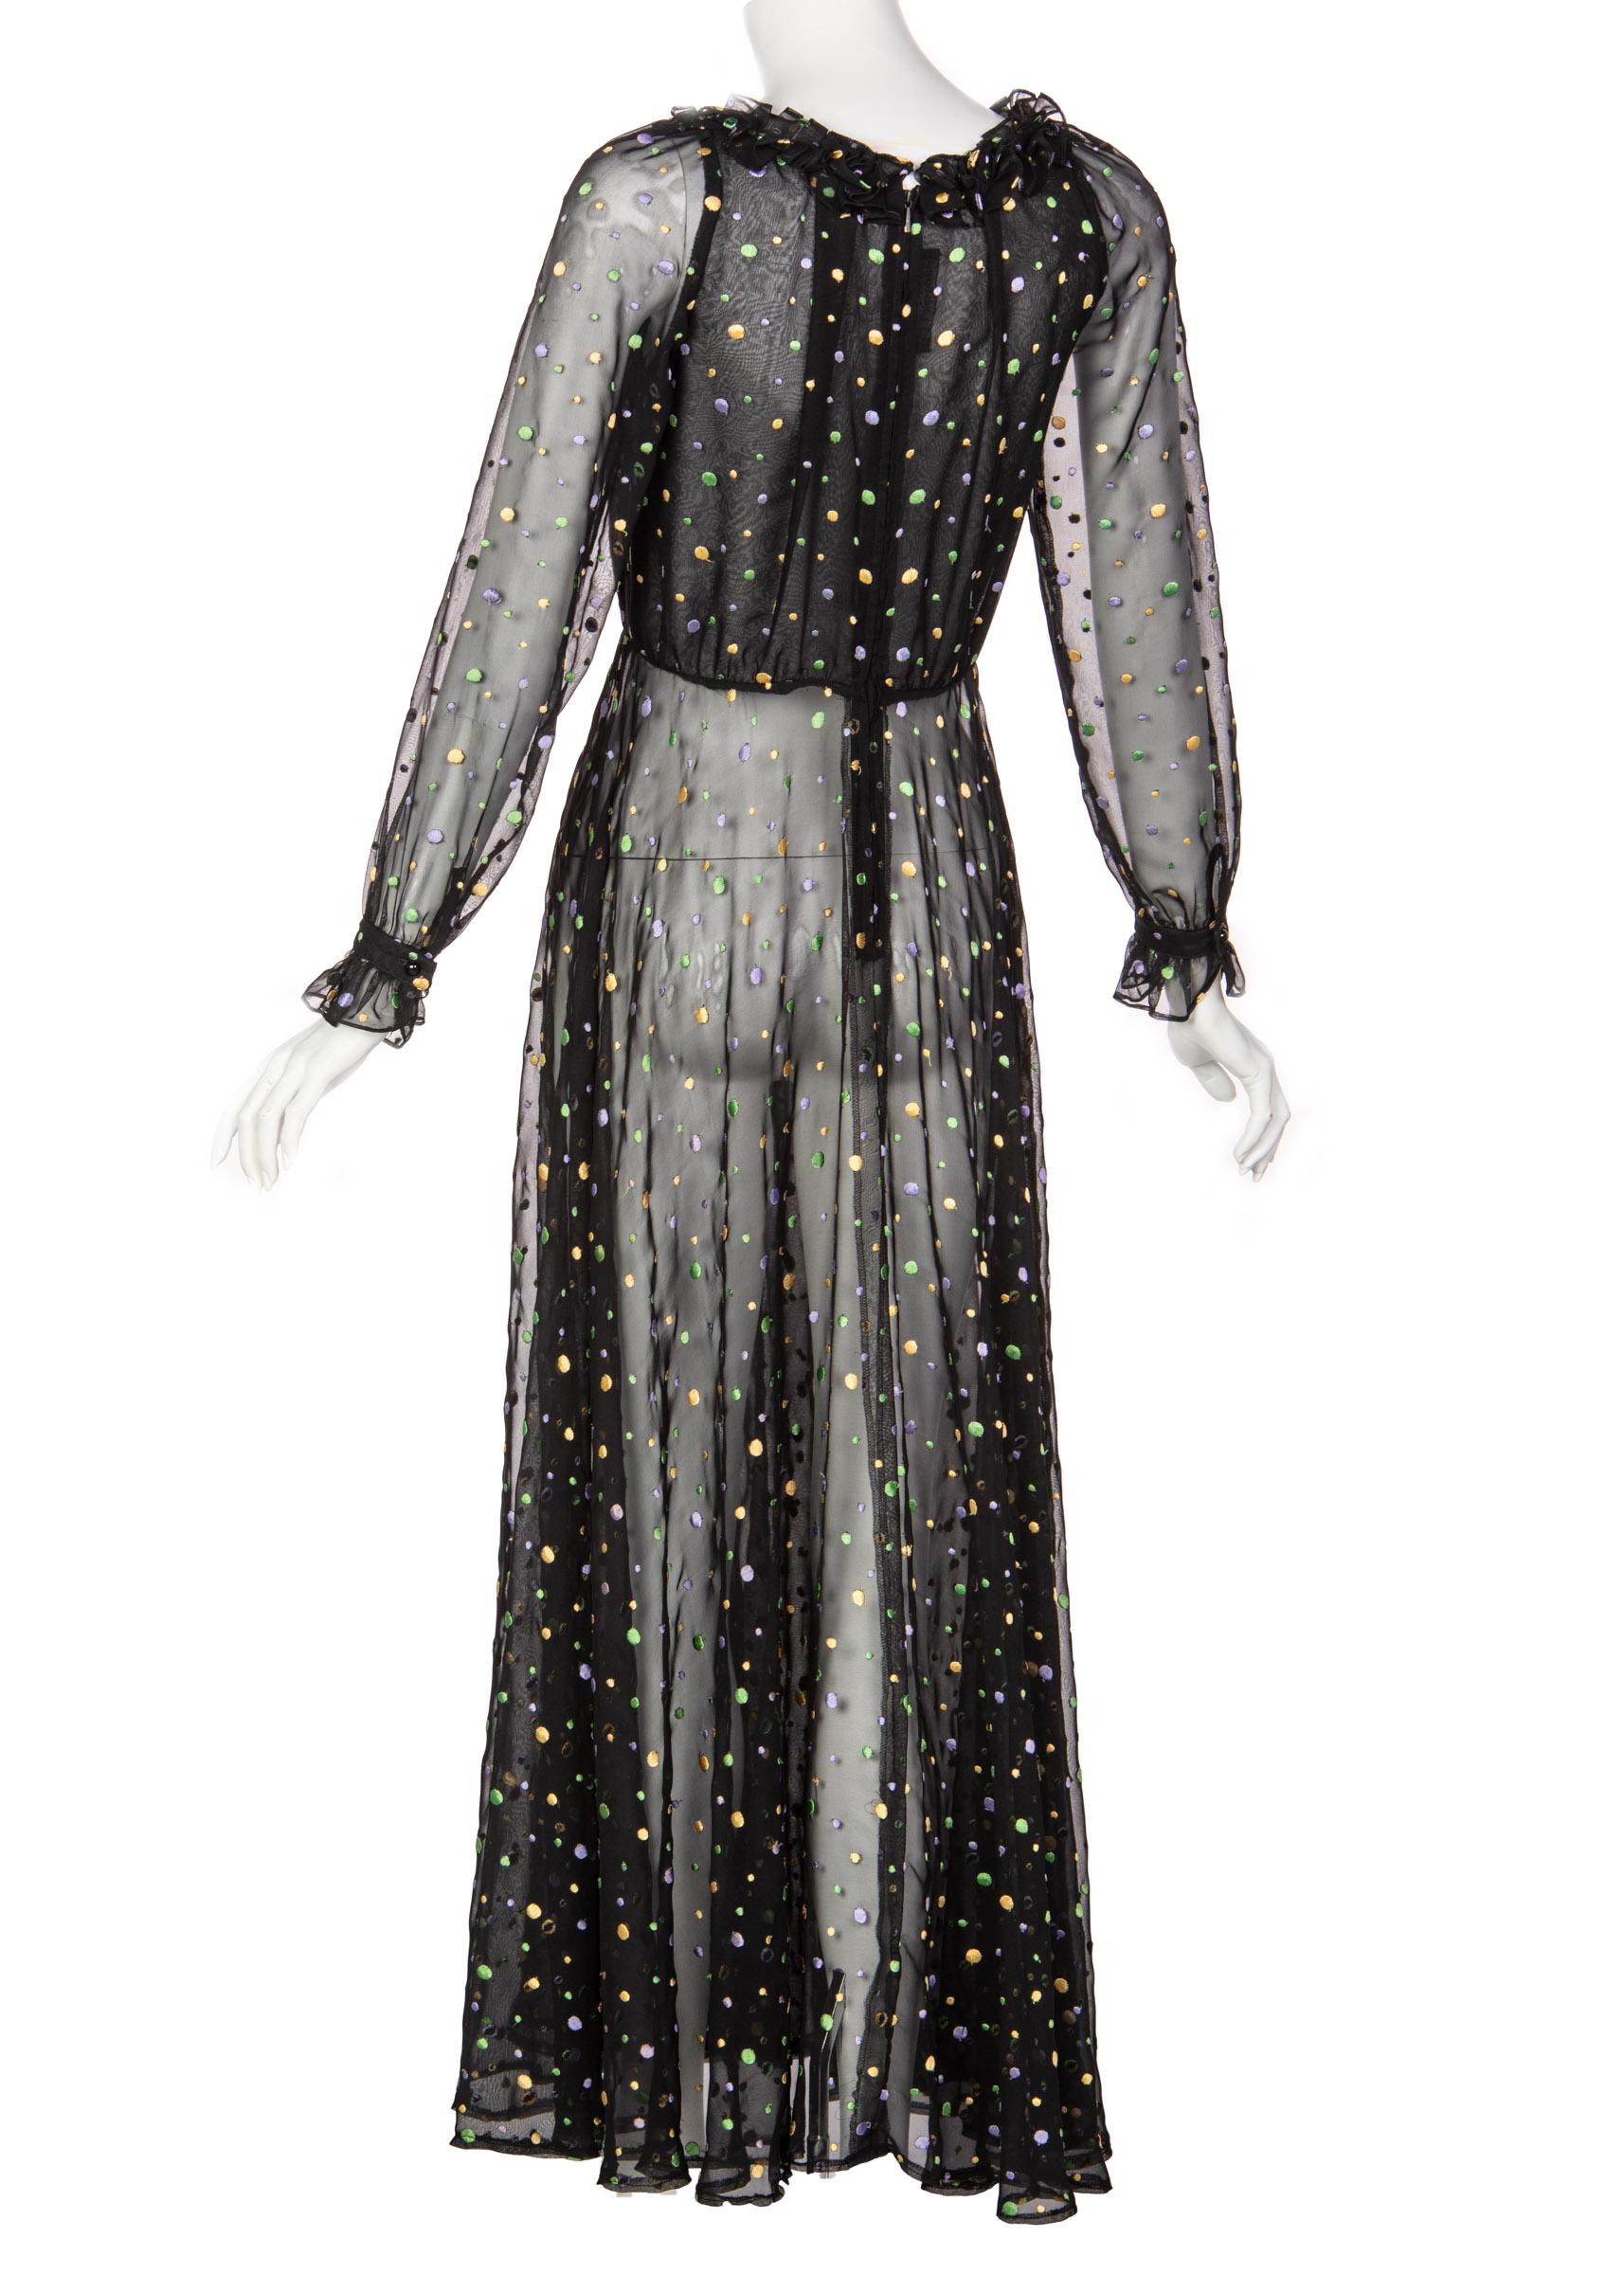 Louis Feraud Vintage Sheer Embroidered Dot Dress, 1970s   1